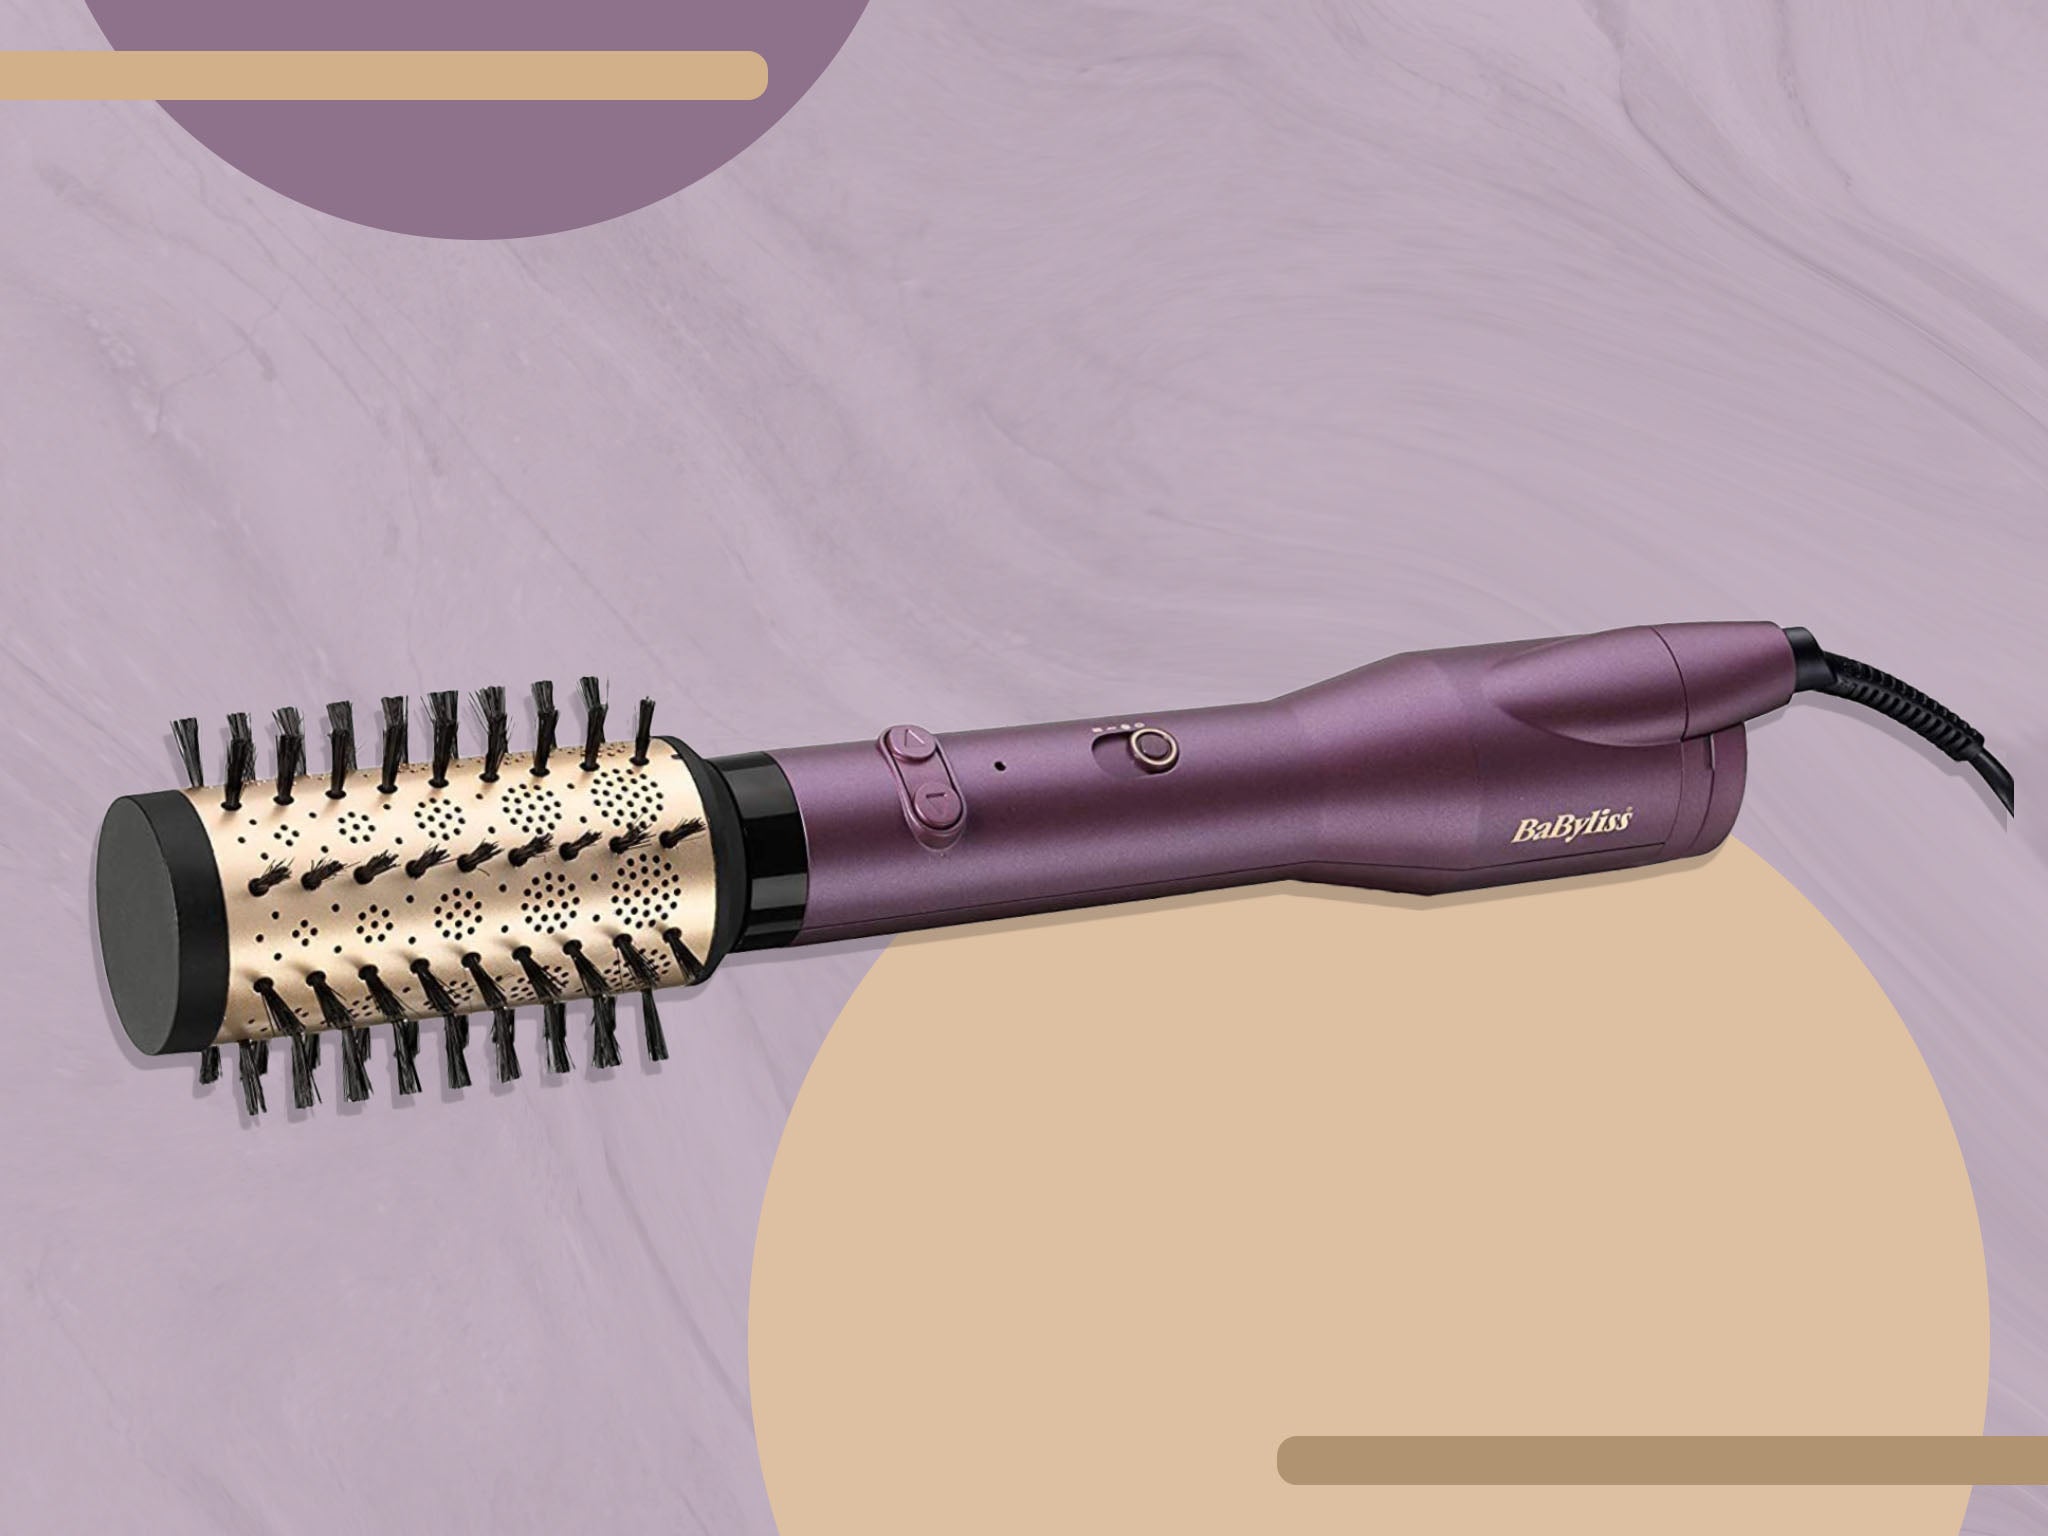 The tool replicates the action of a hairdresser’s blow-dry